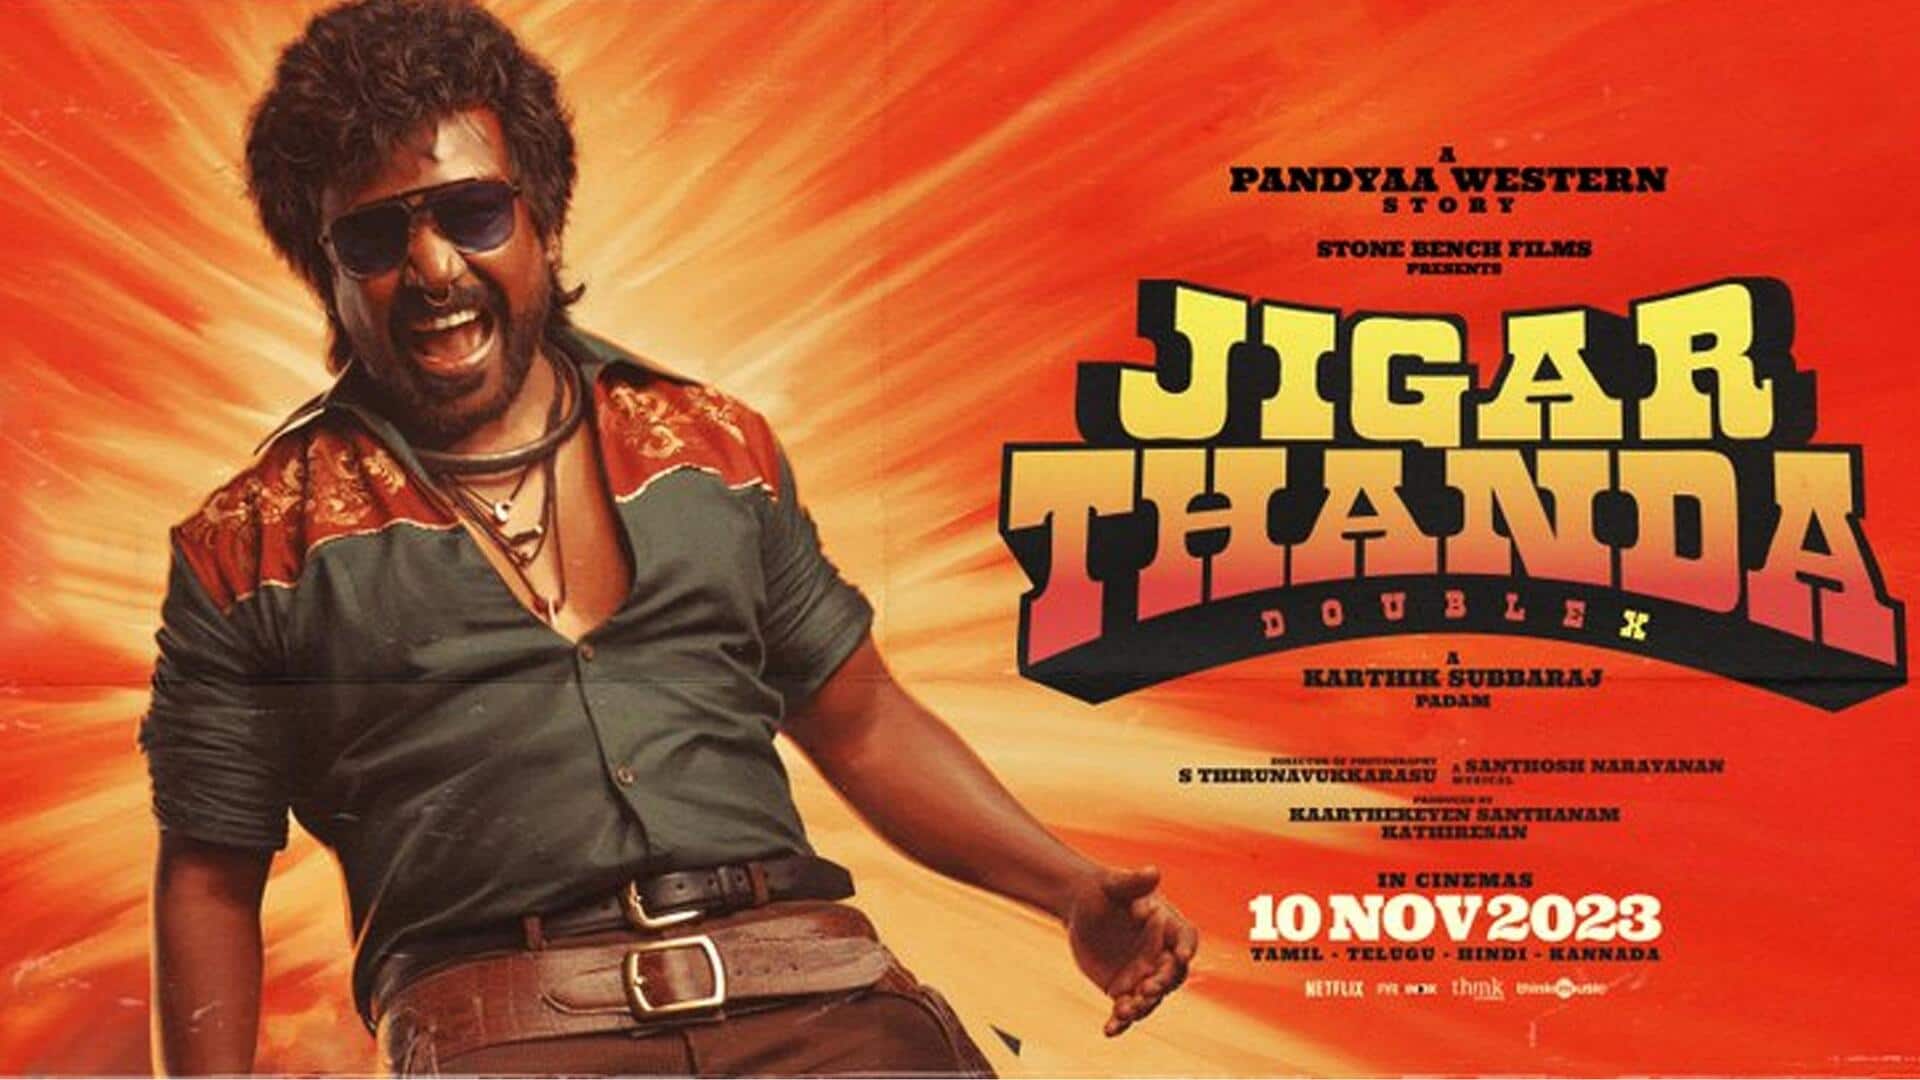 Raghava Lawrence's 'Jigarthanda Double X' to release on this day!